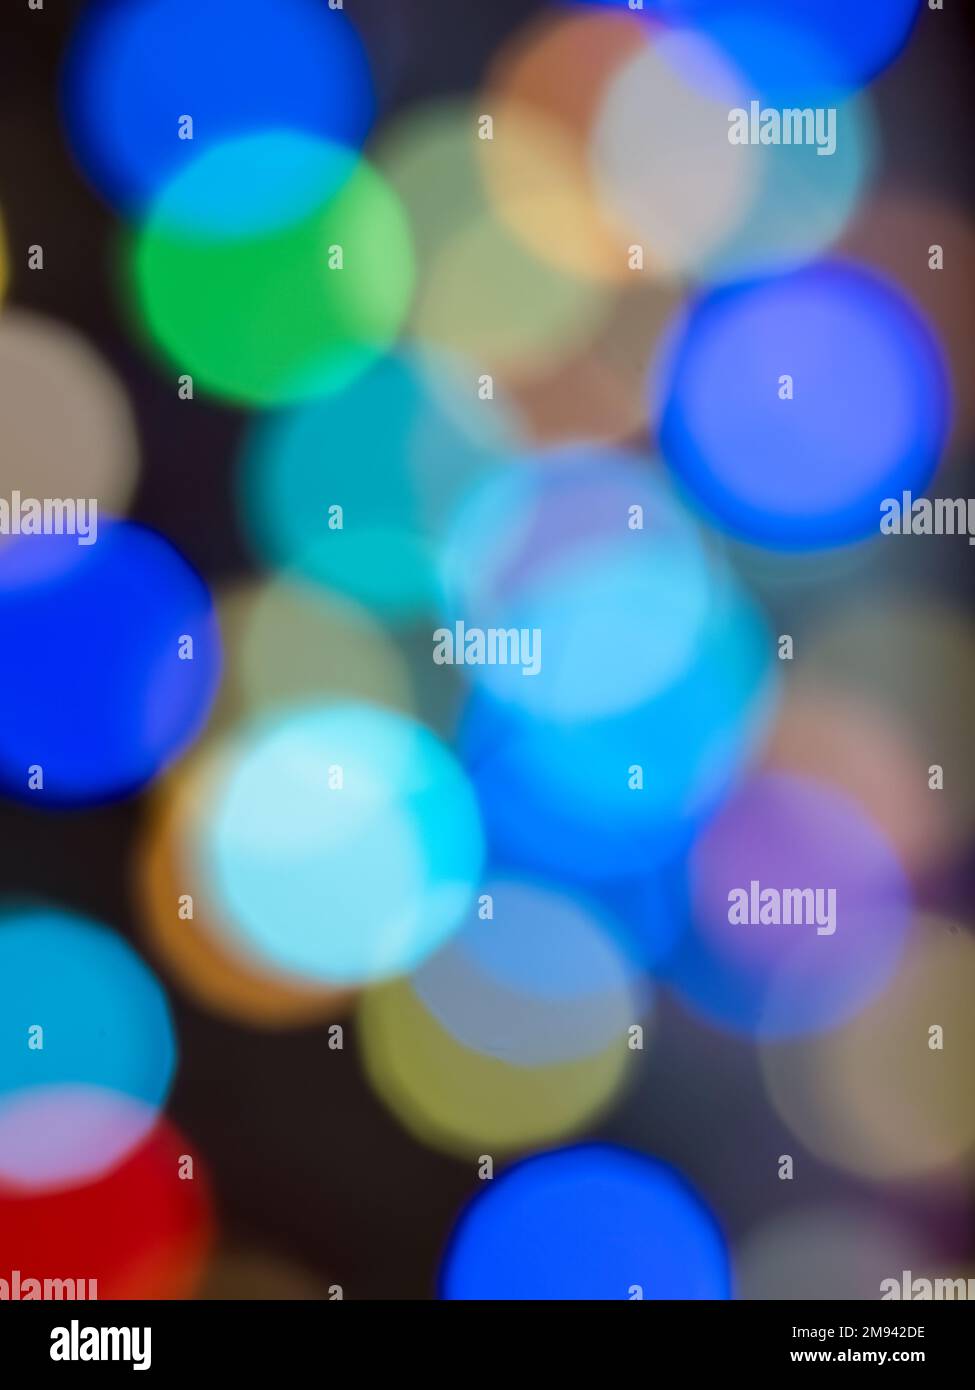 Abstract multicolored circles of light Stock Photo